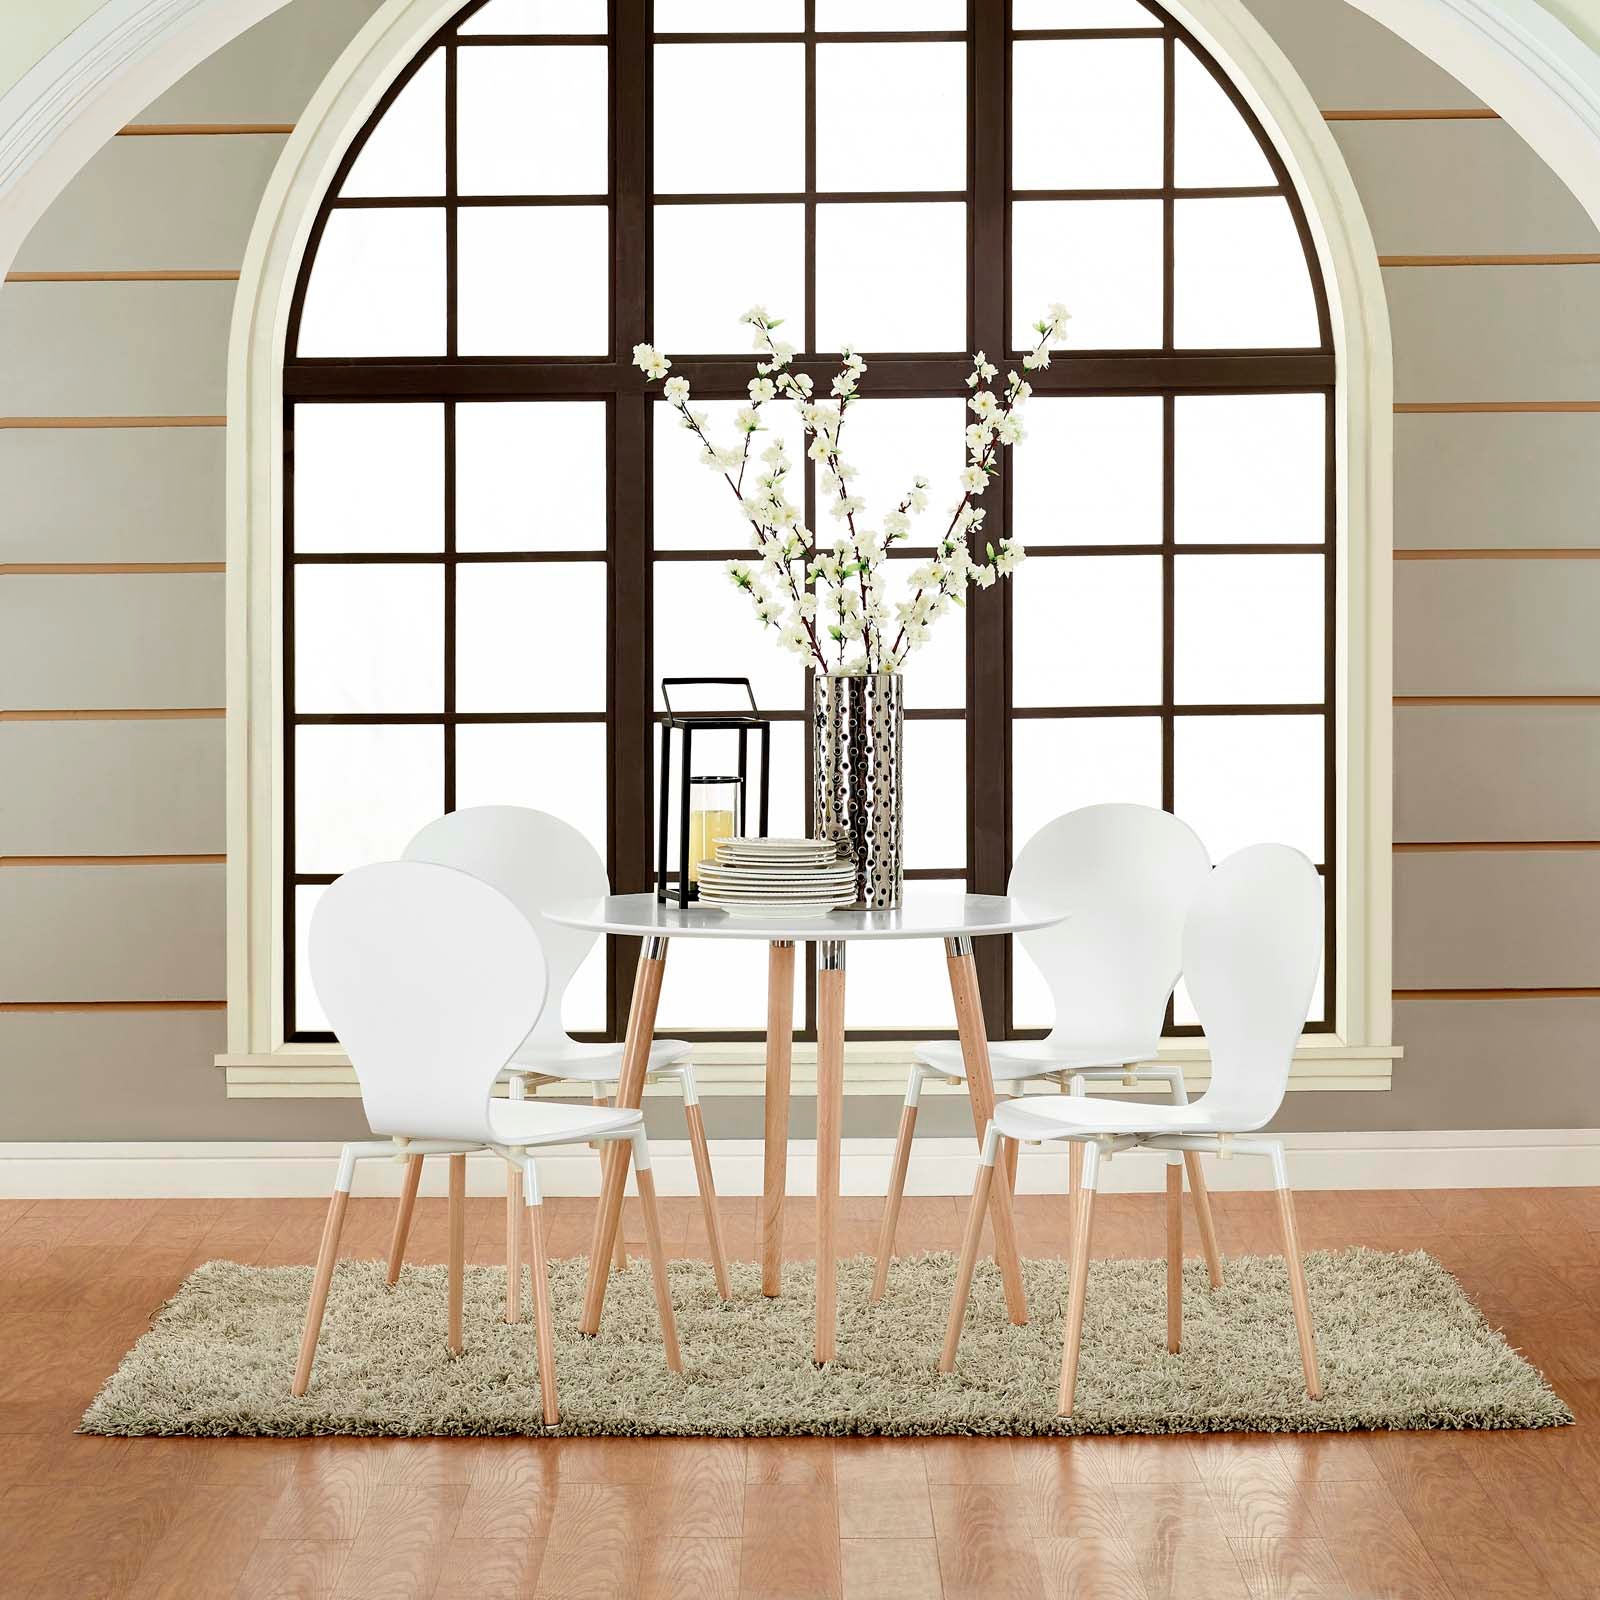 Modway Dining Chairs - Path Dining Chair Set of 4 White